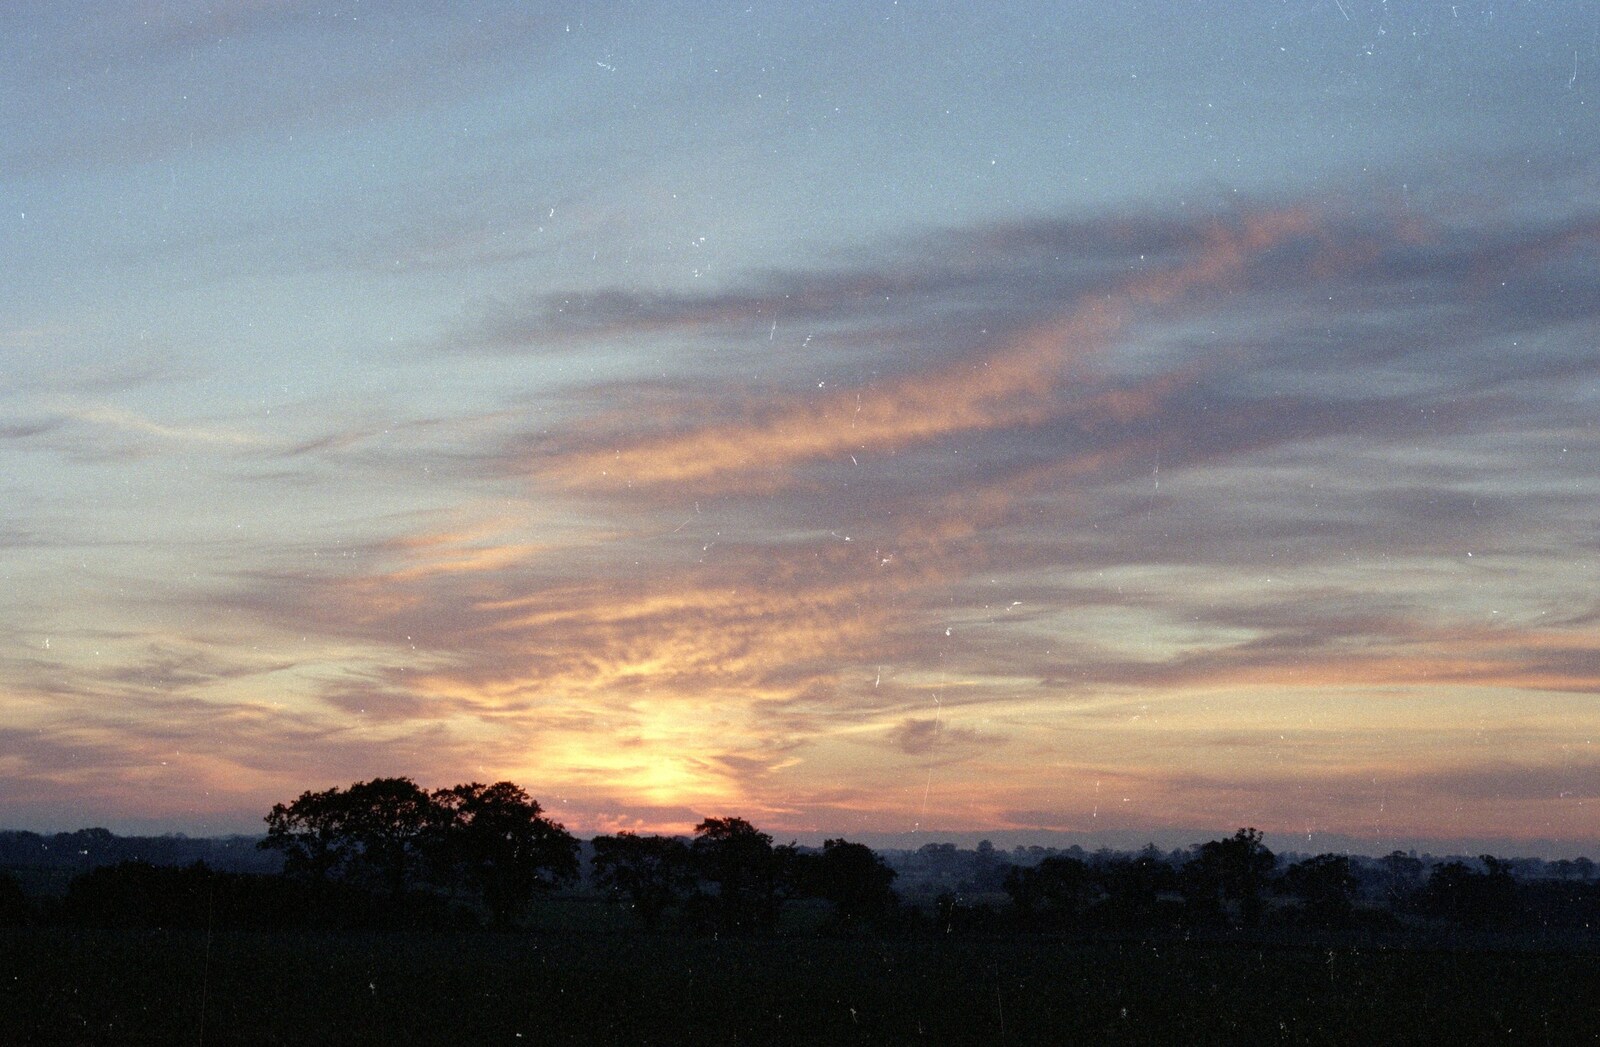 Another sunset over the fields of Red House from Sewell's Cottage Garden Telly, Red House, Norfolk - 14th May 1988